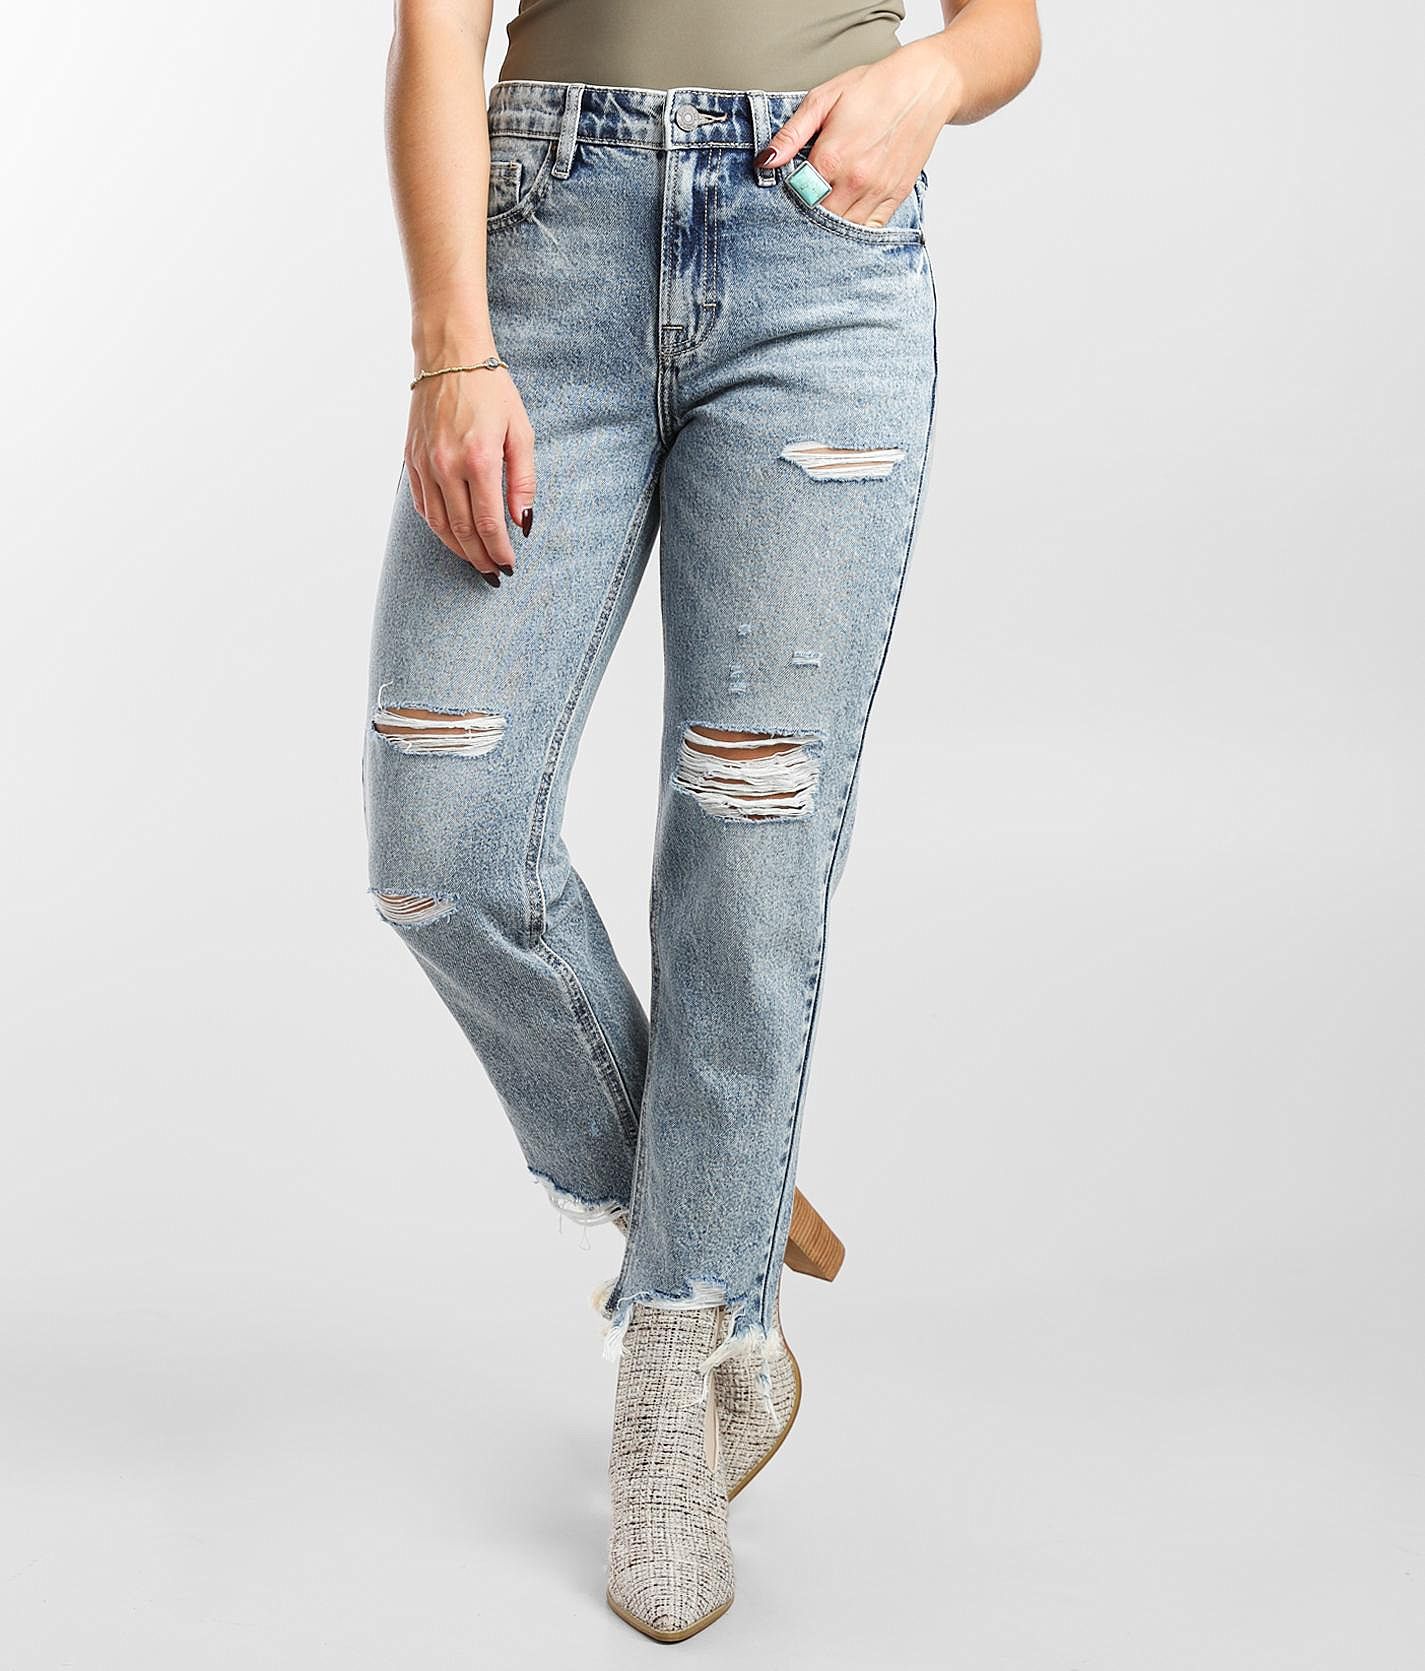 MOTEL X OLIVIA NEILL Low Rise Bootleg Jeans in Dark Vintage Wash